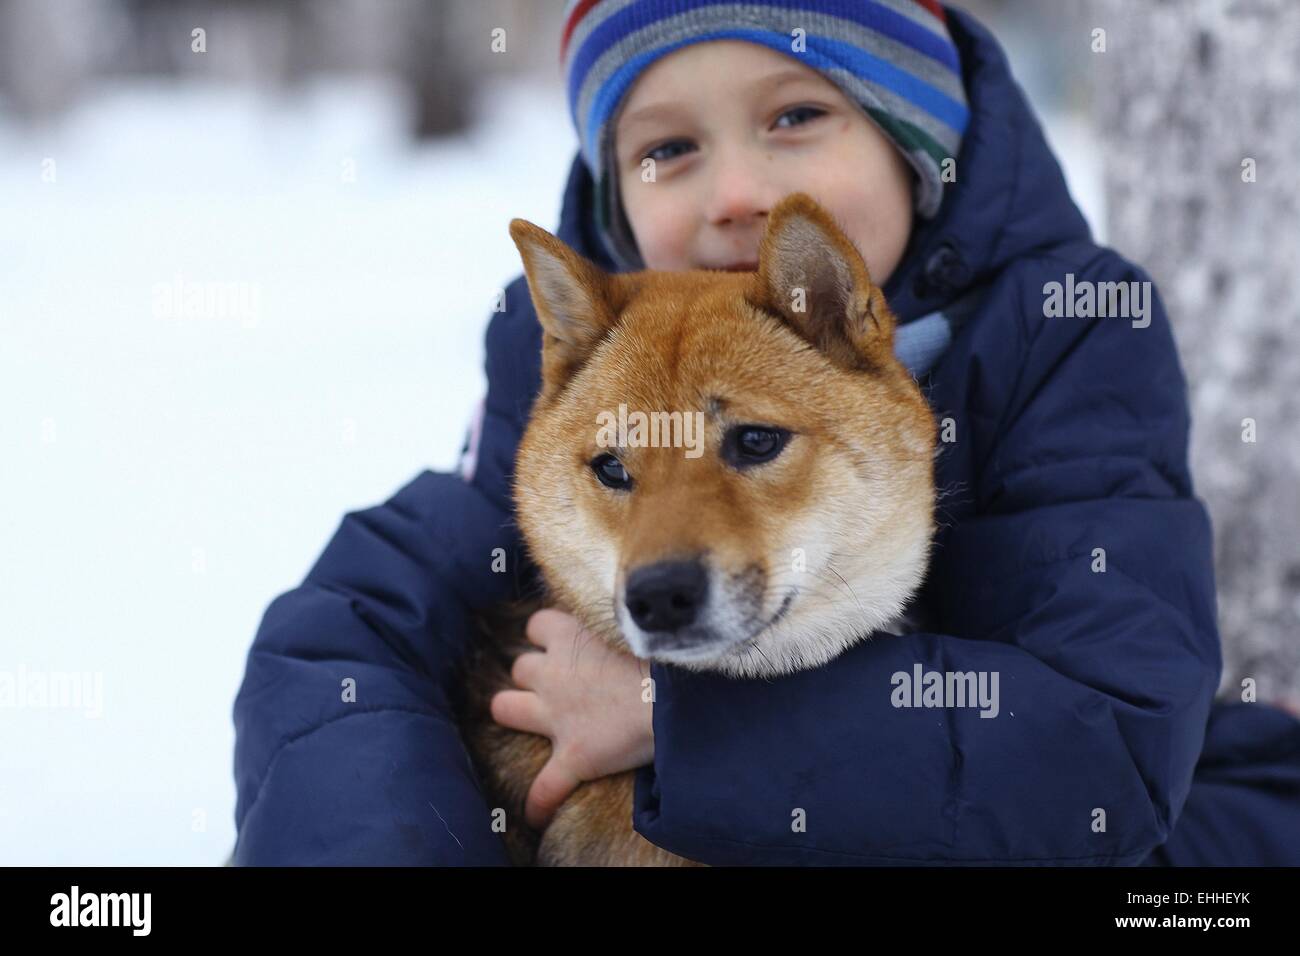 boy and a cute dog concept of friendship Stock Photo